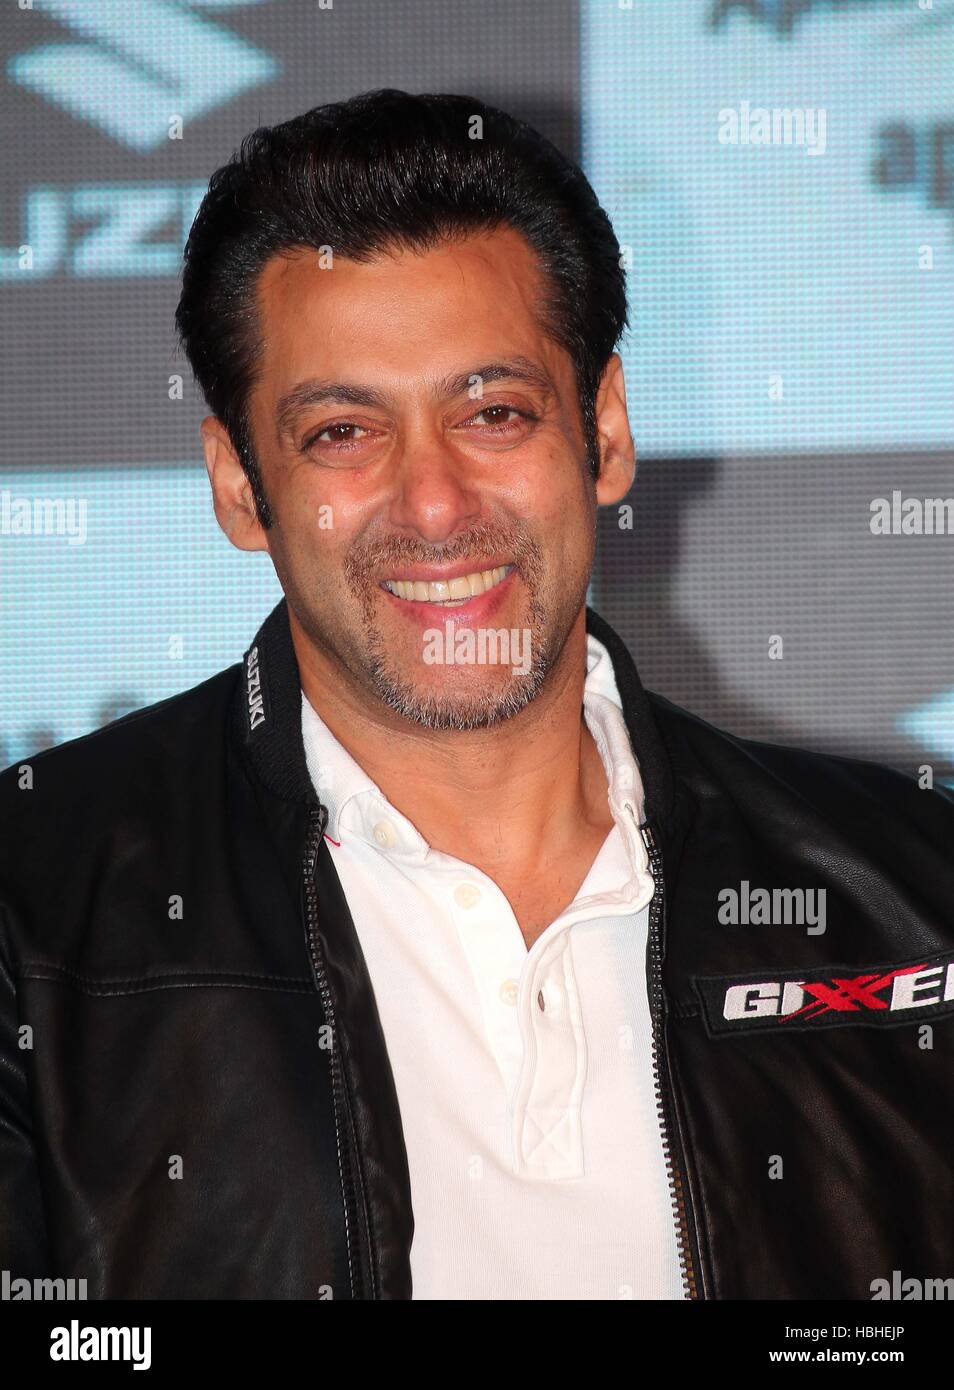 Salman Khan Indian bollywood hindi movie film actor during the launch of Suzuki two wheelers the Gixxer motorcycle and the Lets scooter Mumbai India Asia , No model release - only for editorial use Stock Photo